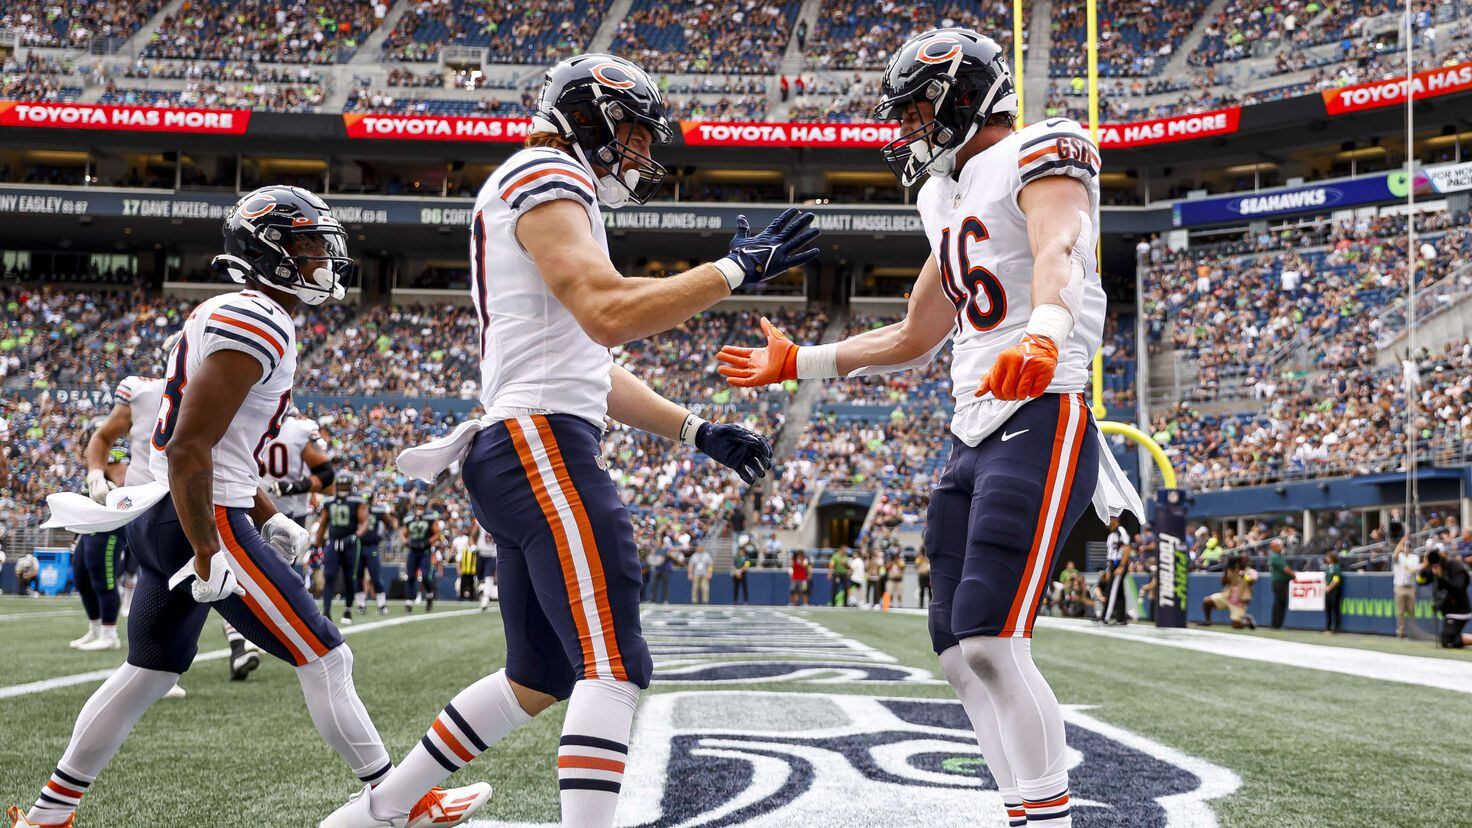 Chicago Bears 27 vs. 11 Seattle Seahawks summary: stats and highlights